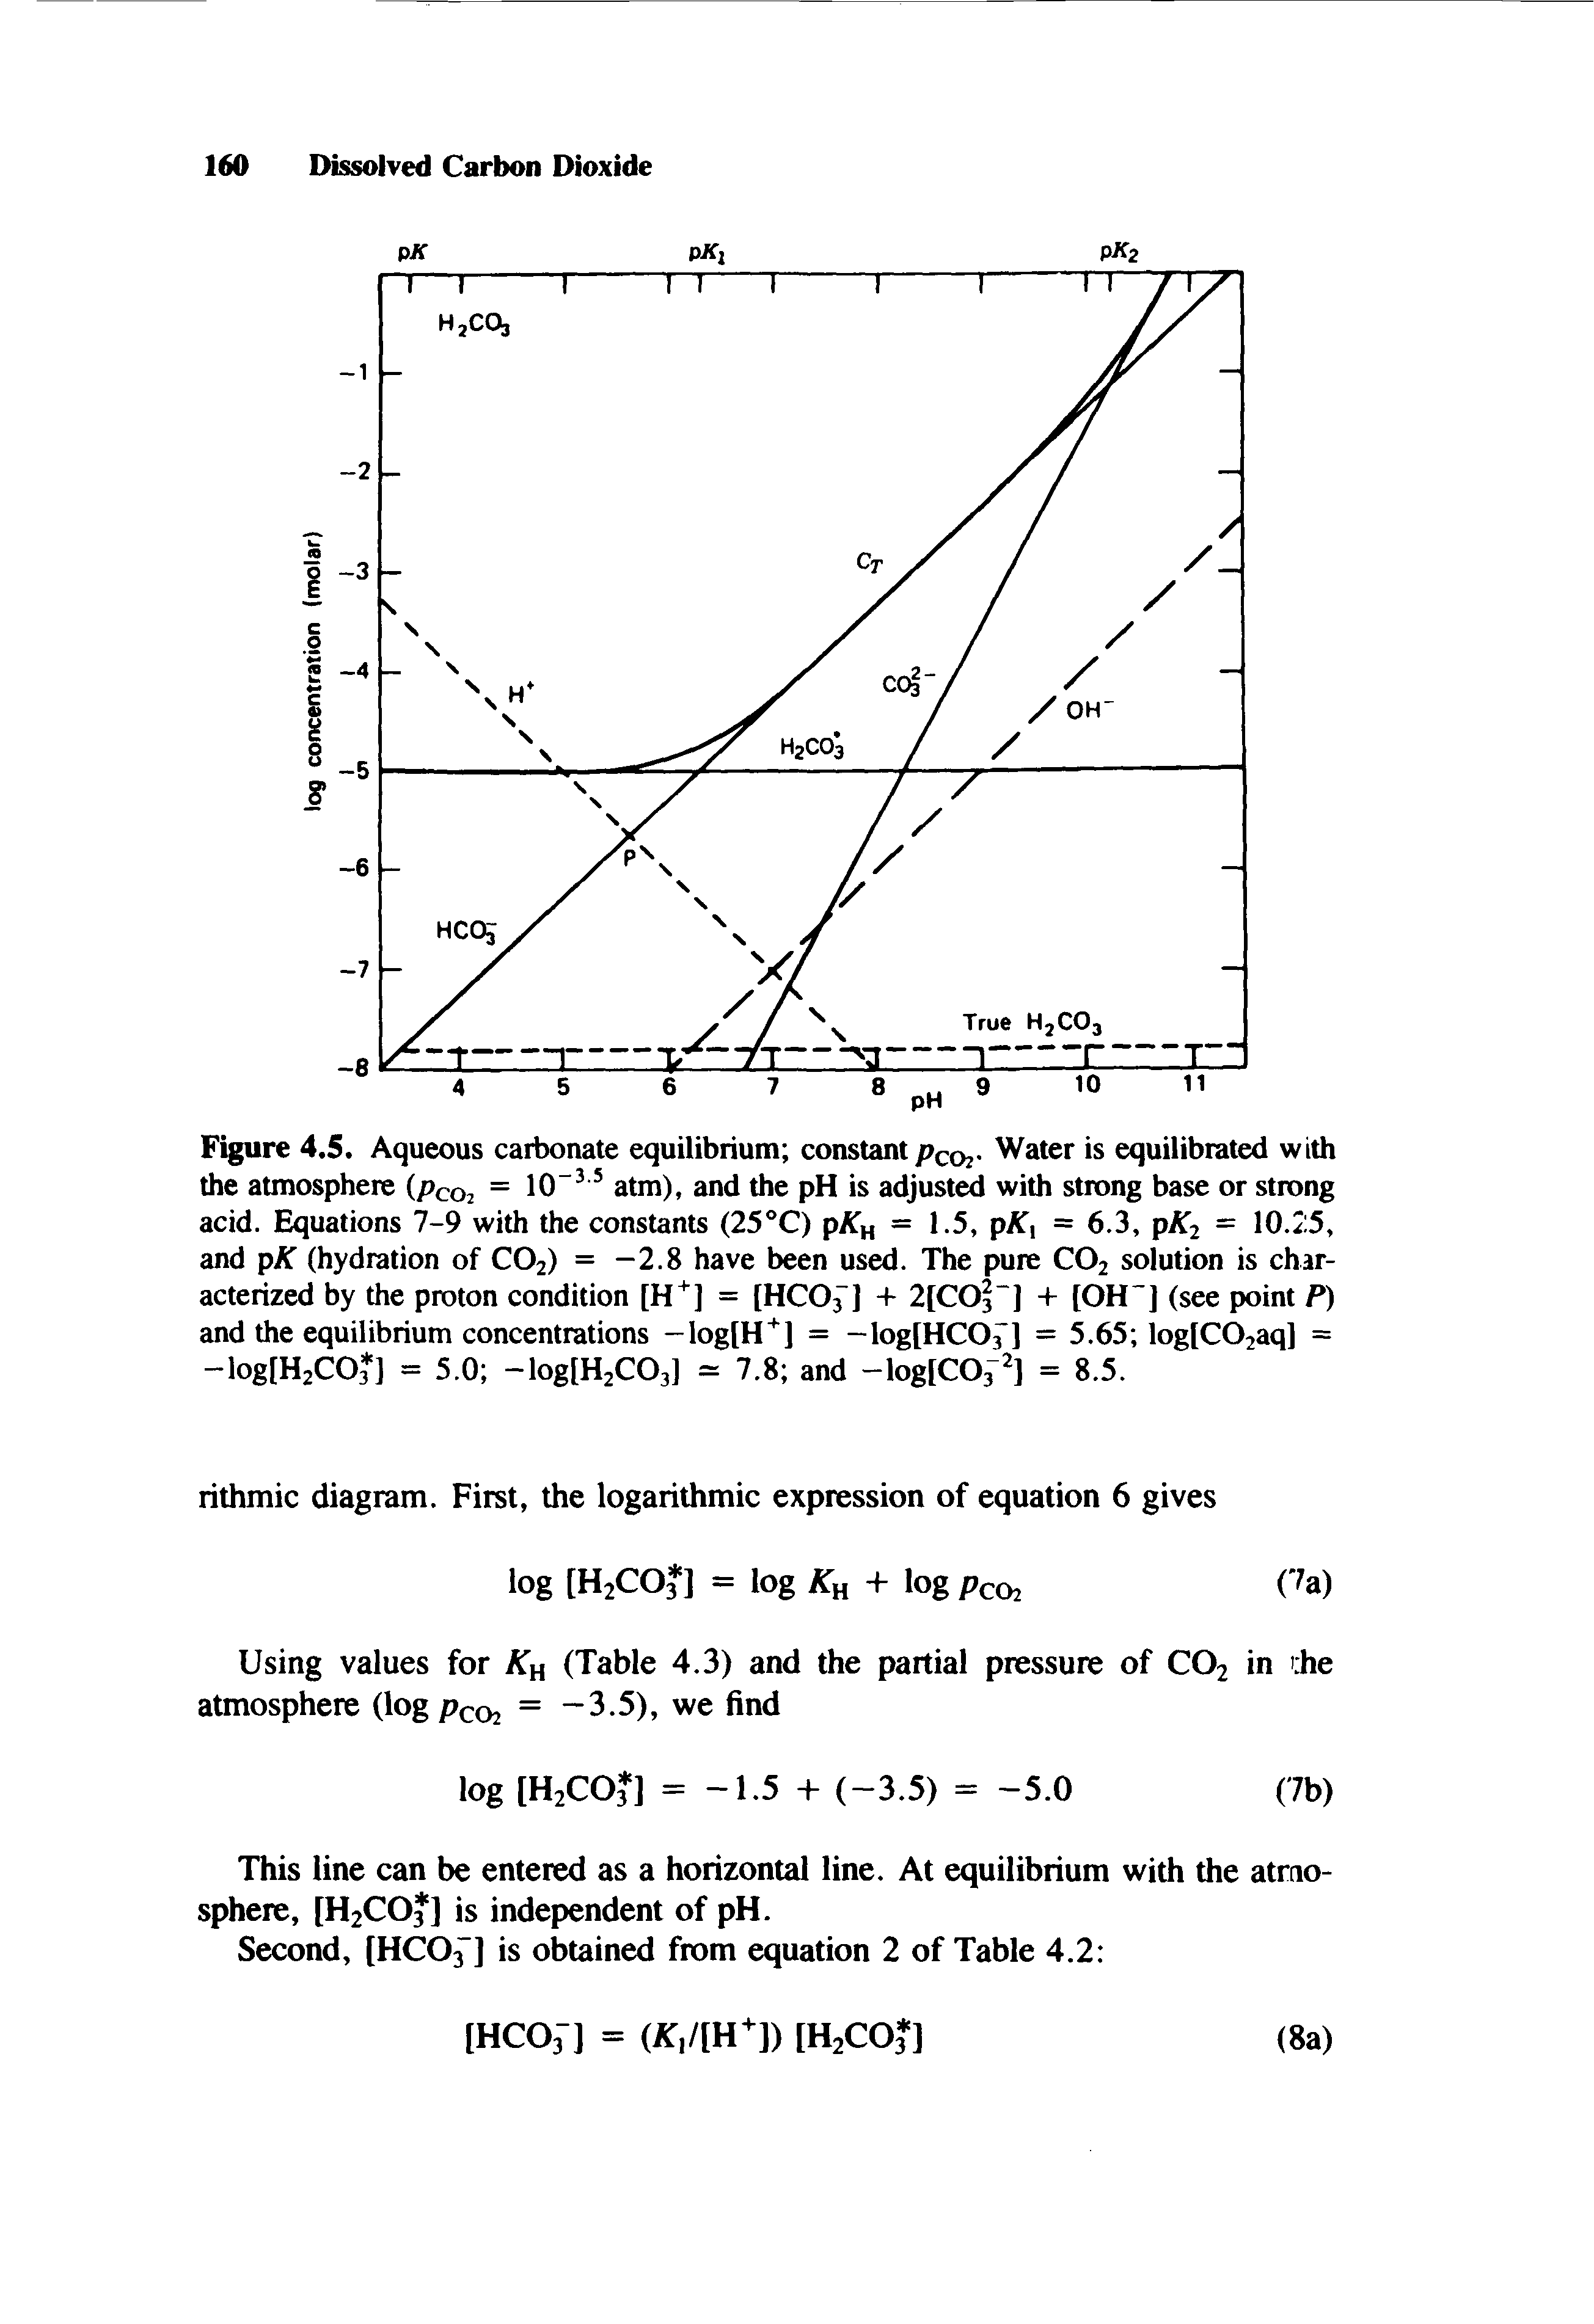 Figure 4.5. Aqueous carbonate equilibrium constant Pcoz- Water is equilibrated with the atmosphere pco2 10 atm), and the pH is adjusted with strong base or strong acid. Equations 7-9 with the constants (25°C) pATn = 1.5, pAT, = 6.3, pAT2 = 10.25, and pAT (hydration of CO2) = -2.8 have been used. The pure CO2 solution is characterized by the proton condition [H ] = [HCO ] + 2[C03 ] + [OH ] (see point P) and the equilibrium concentrations -log[H J = -log[HCO ] = 5.65 log[C02aq] = -log[H2C03 ] = 5.0 -log[H2C03] = 7.8 and -log[C03 ] = 8.5.